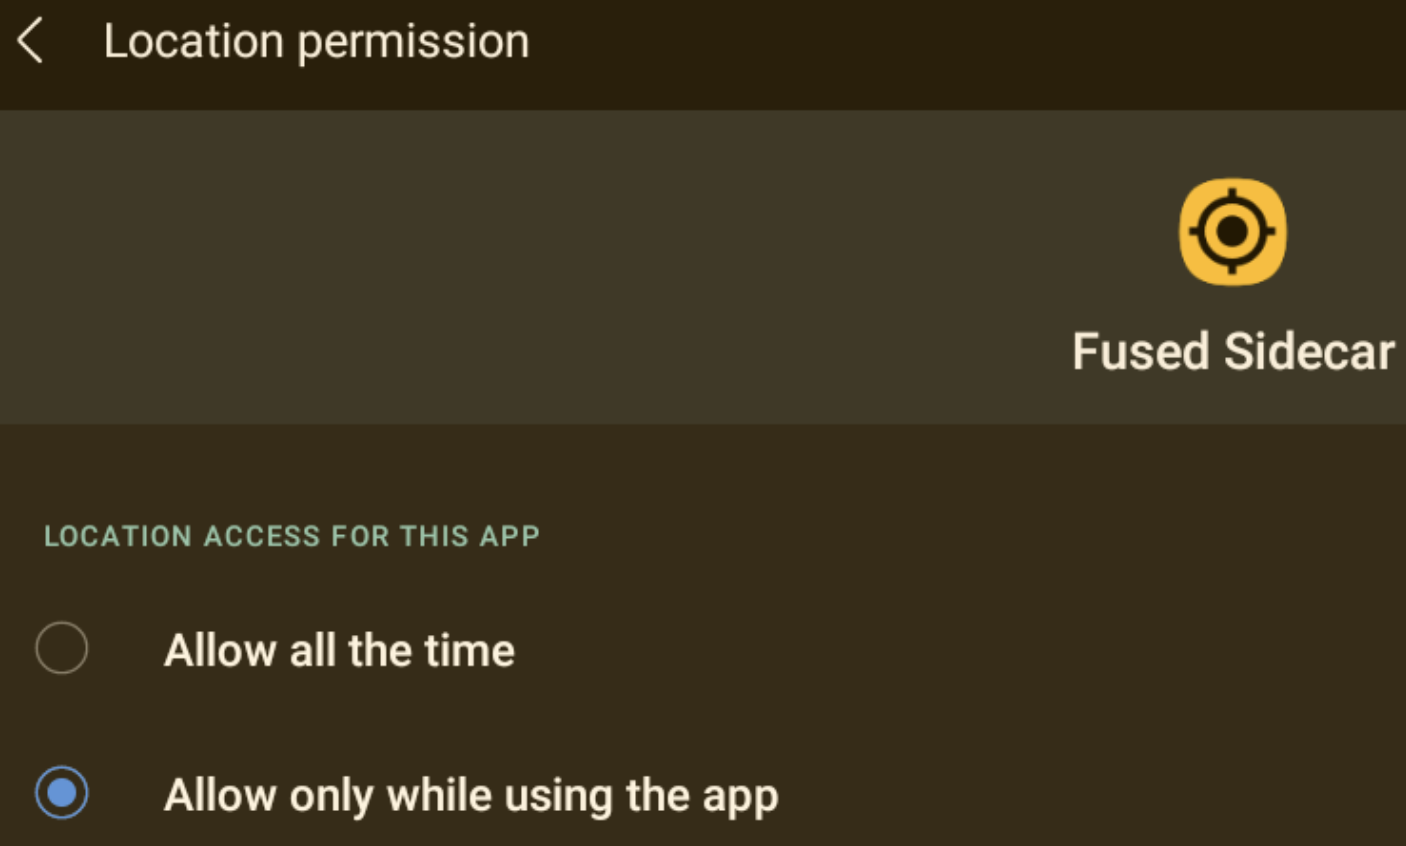 Fused Sidecar App permissions background off